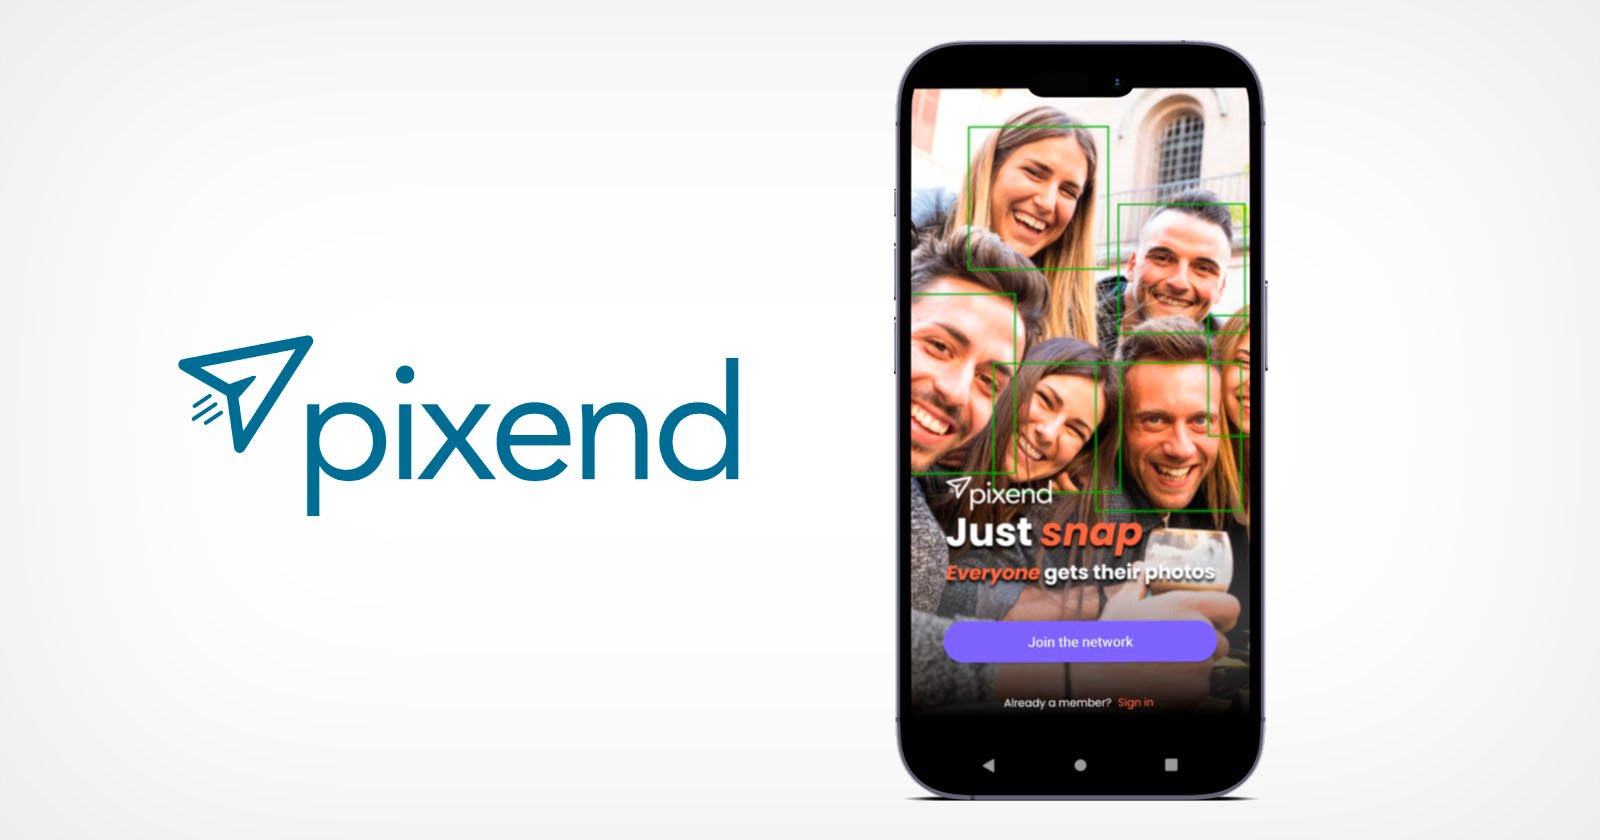 Pixend is a new startup that claims its facial recognition technology can send photos to the people featured in them automatically, removing the manua